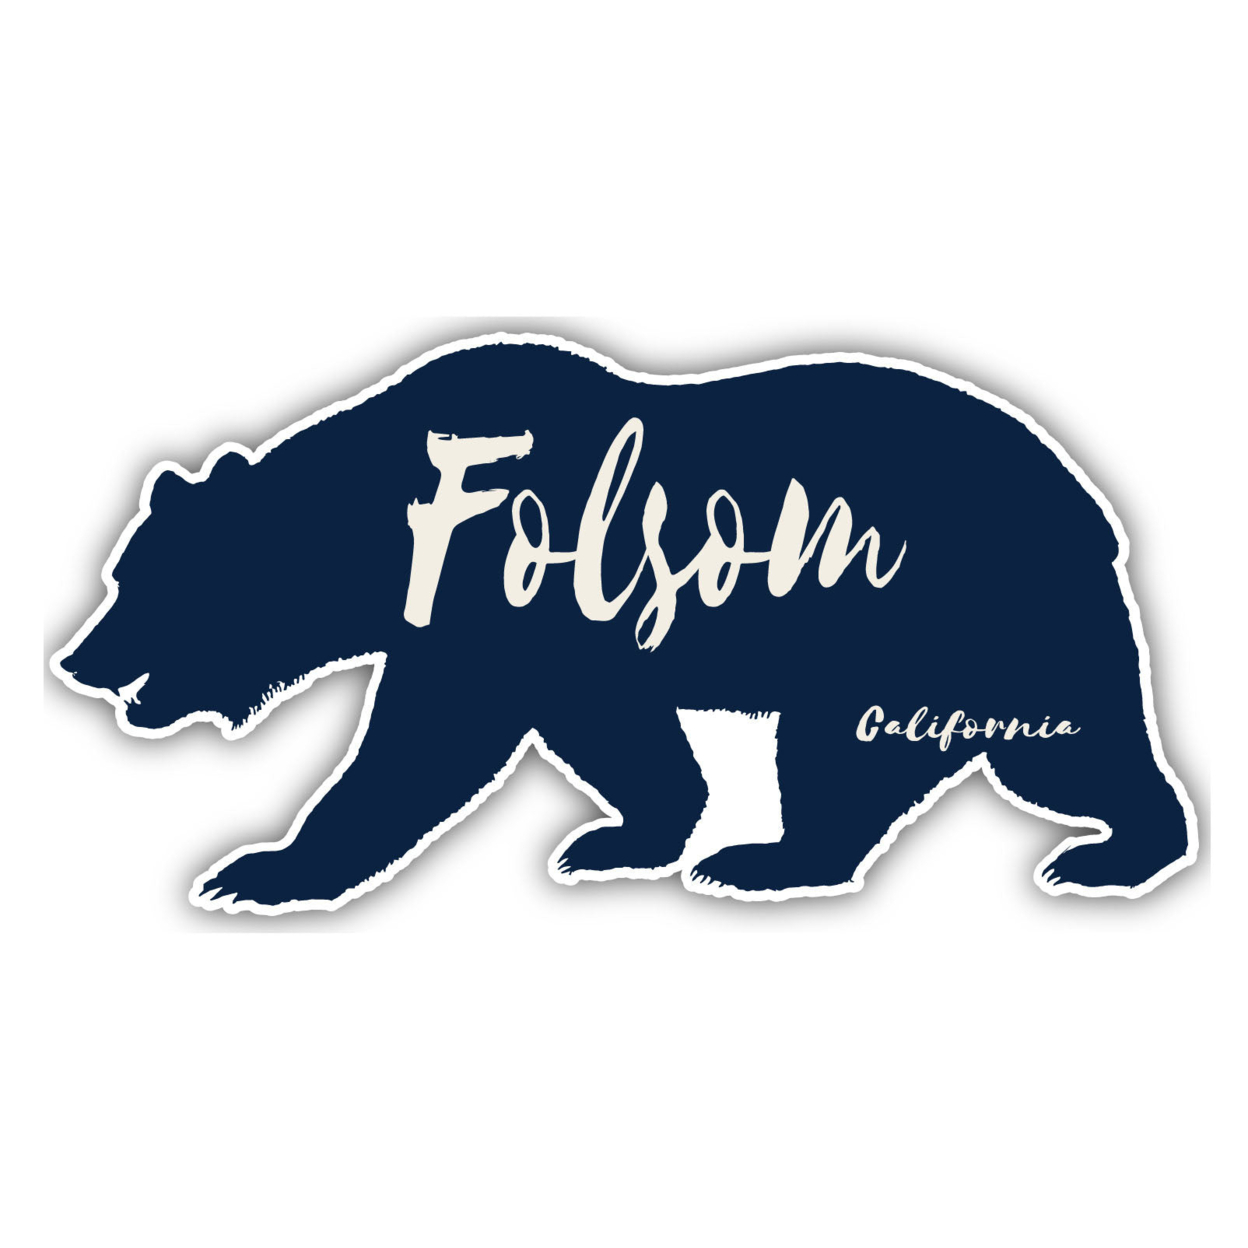 Folsom California Souvenir Decorative Stickers (Choose Theme And Size) - 4-Pack, 6-Inch, Tent